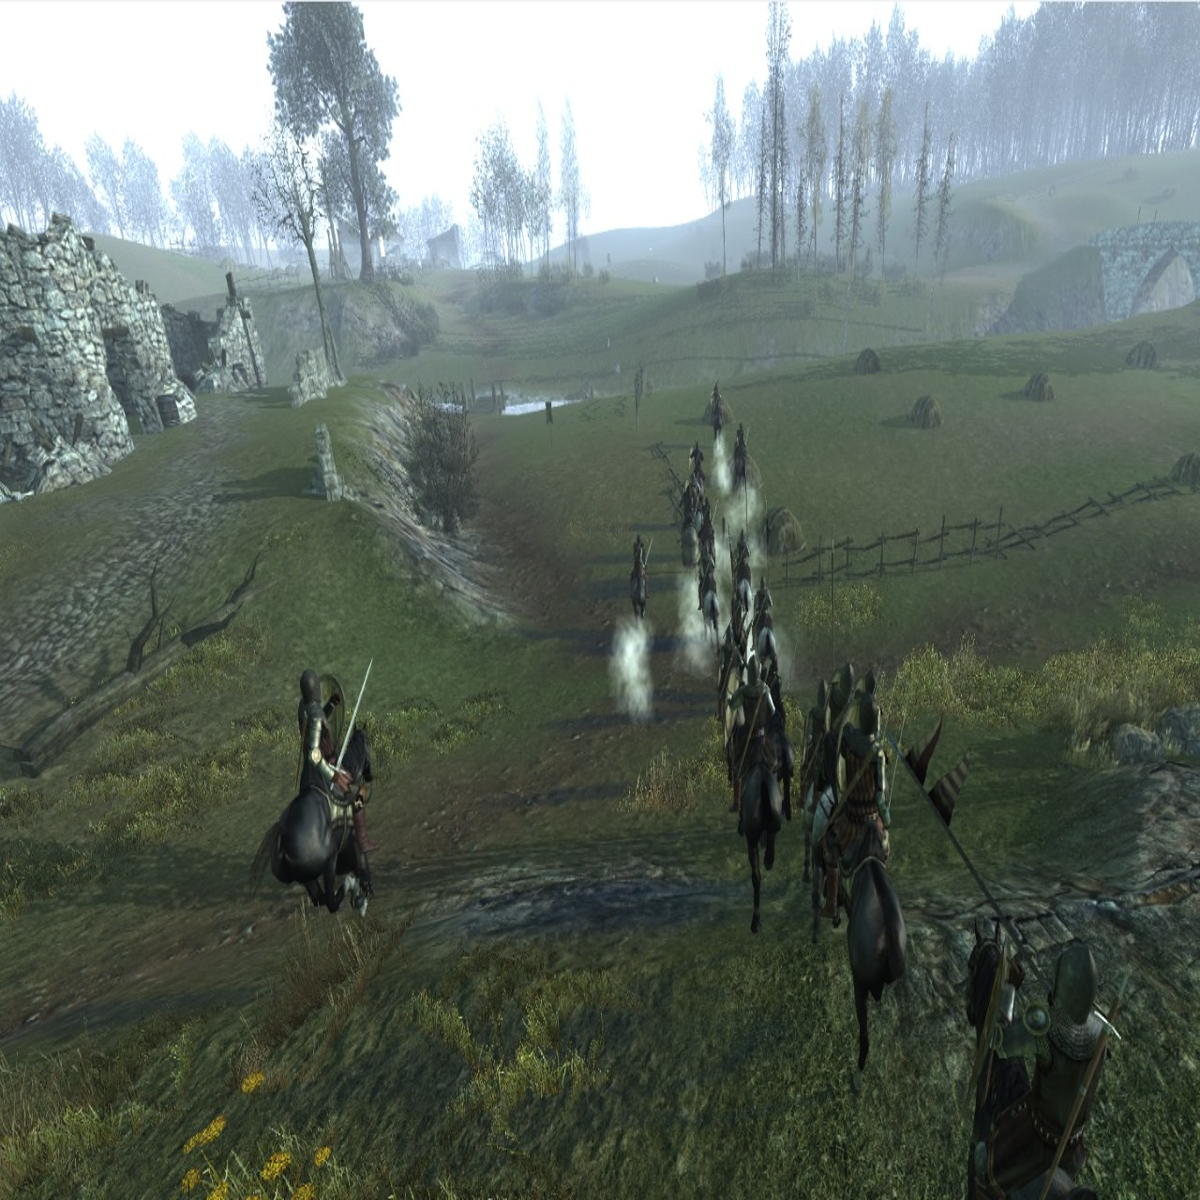 Mount & Blade: Warband A Clash Of Kings A Song Of Ice And Fire A Game